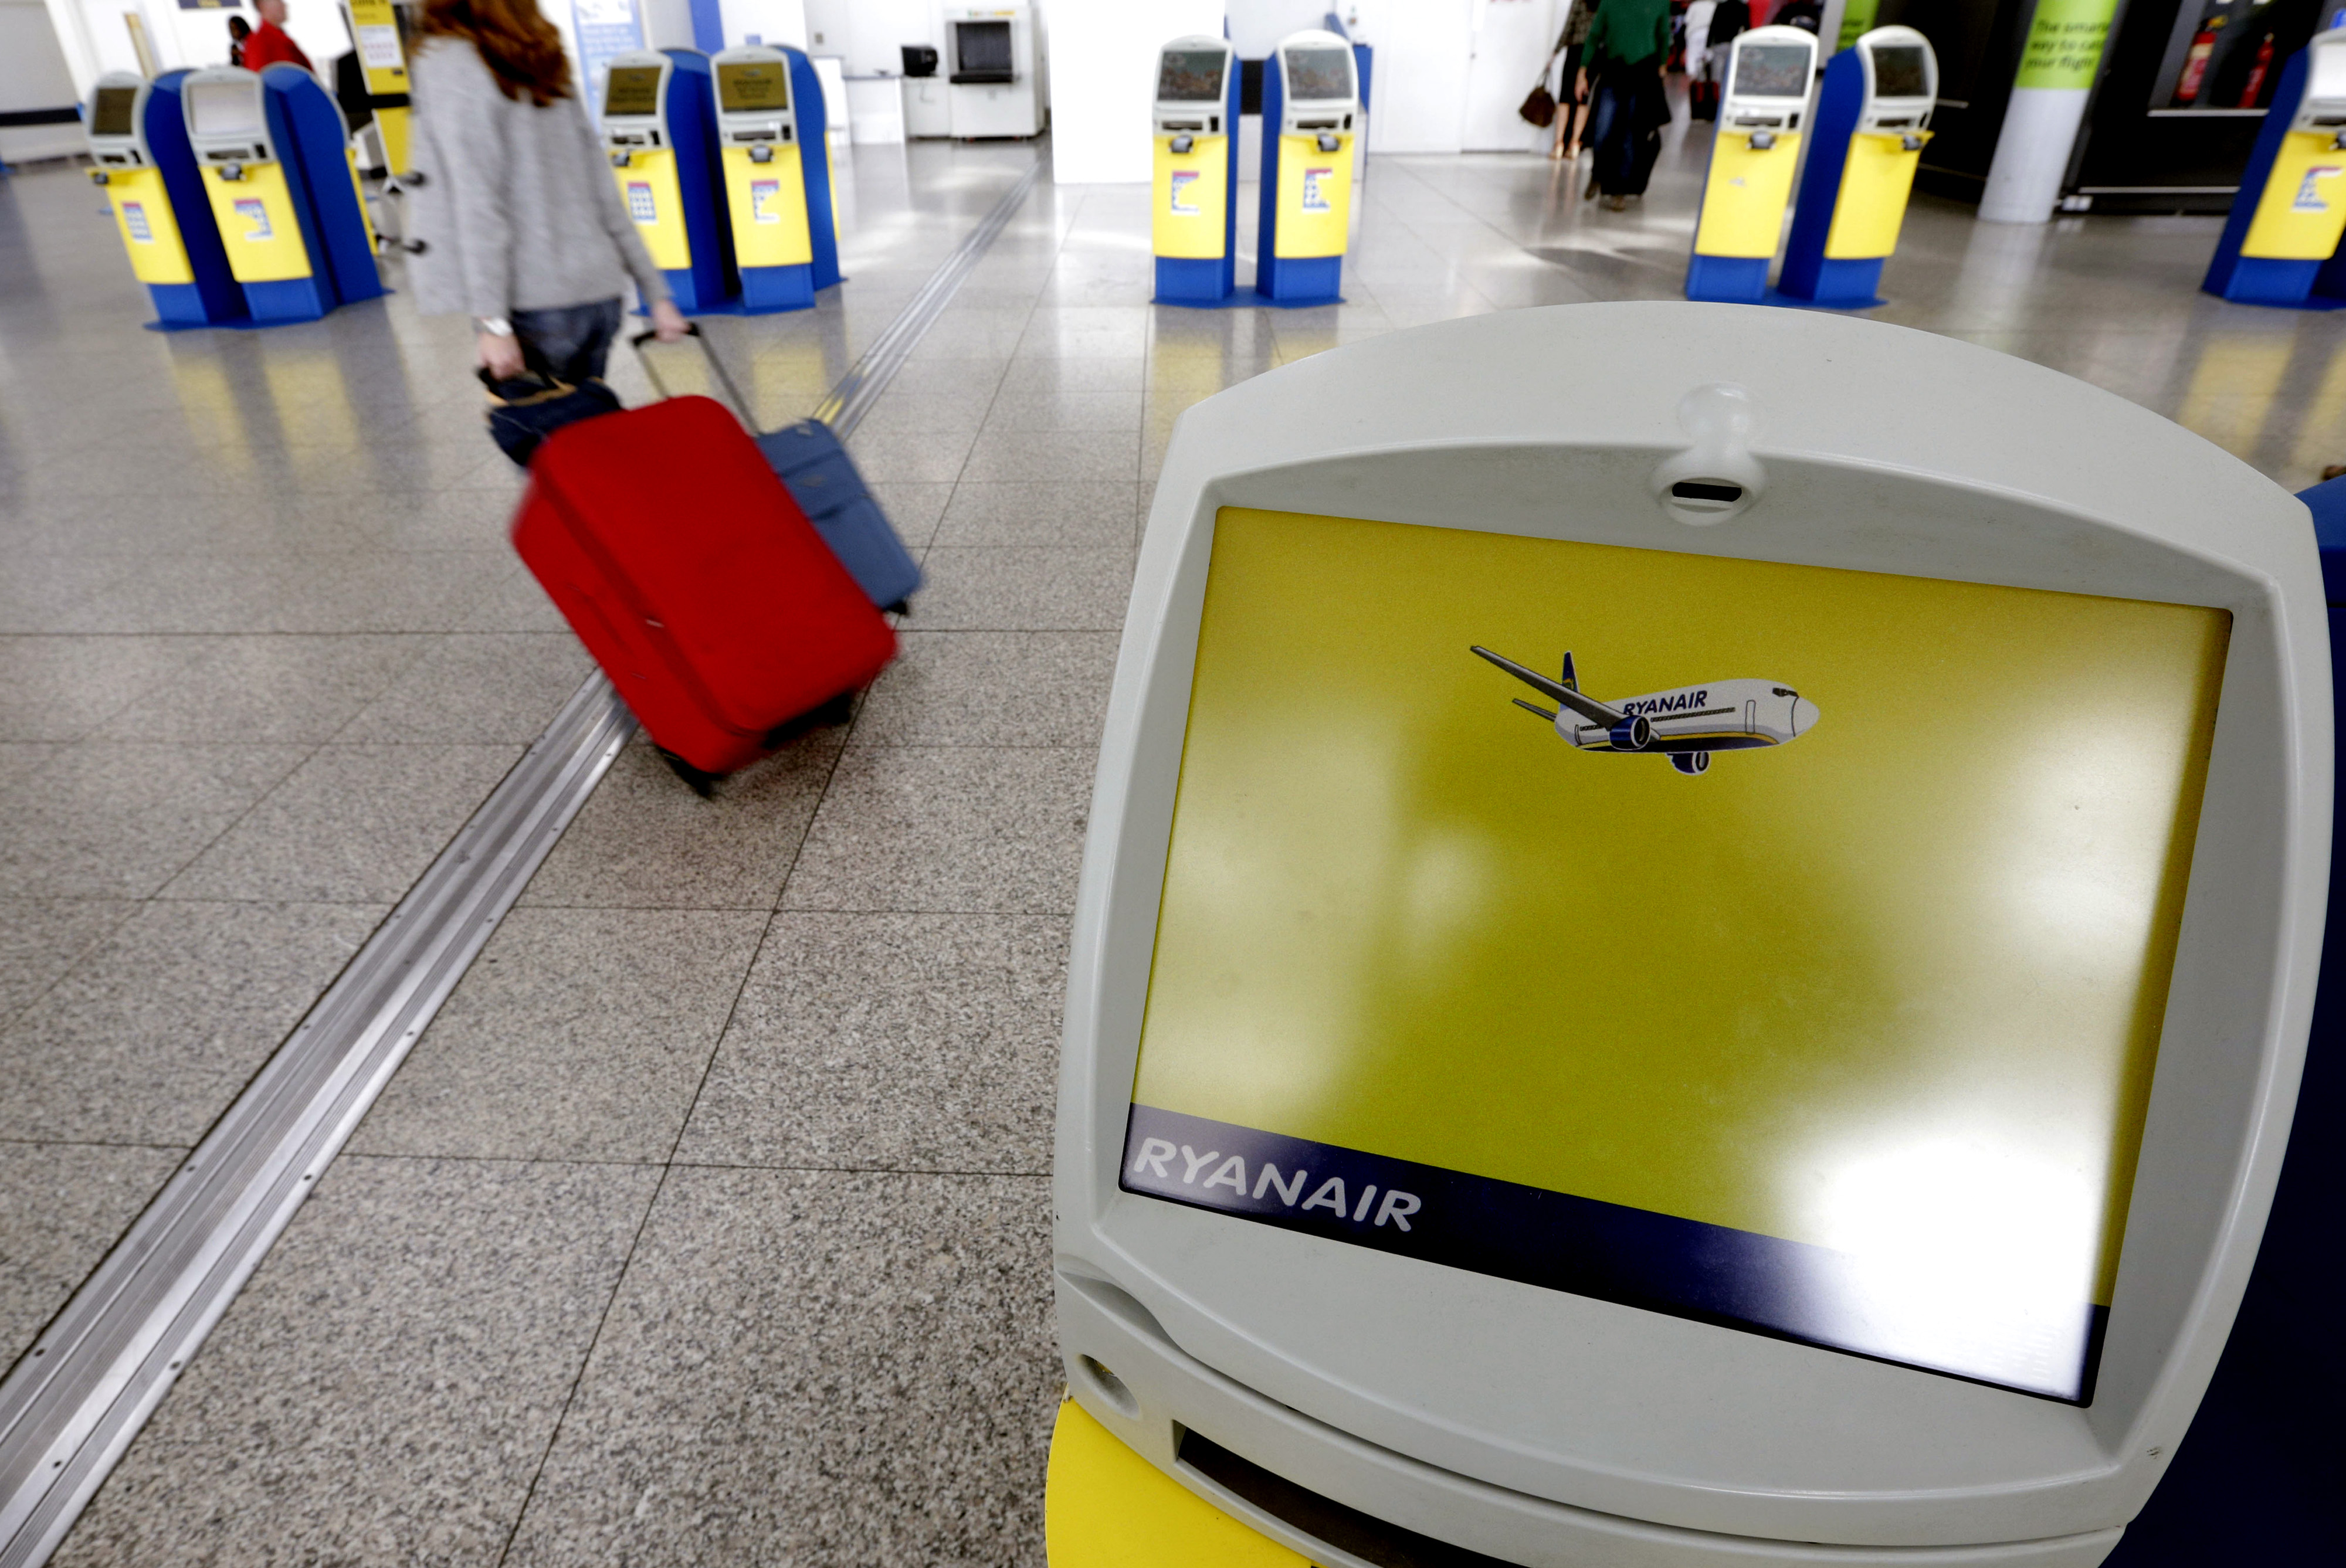 A passenger passes self-service check-in machines Ryanair Holdings Plc at Stansted Airport in London, U.K., on Wednesday, Aug. 7, 2013. (Bloomberg via Getty Images)